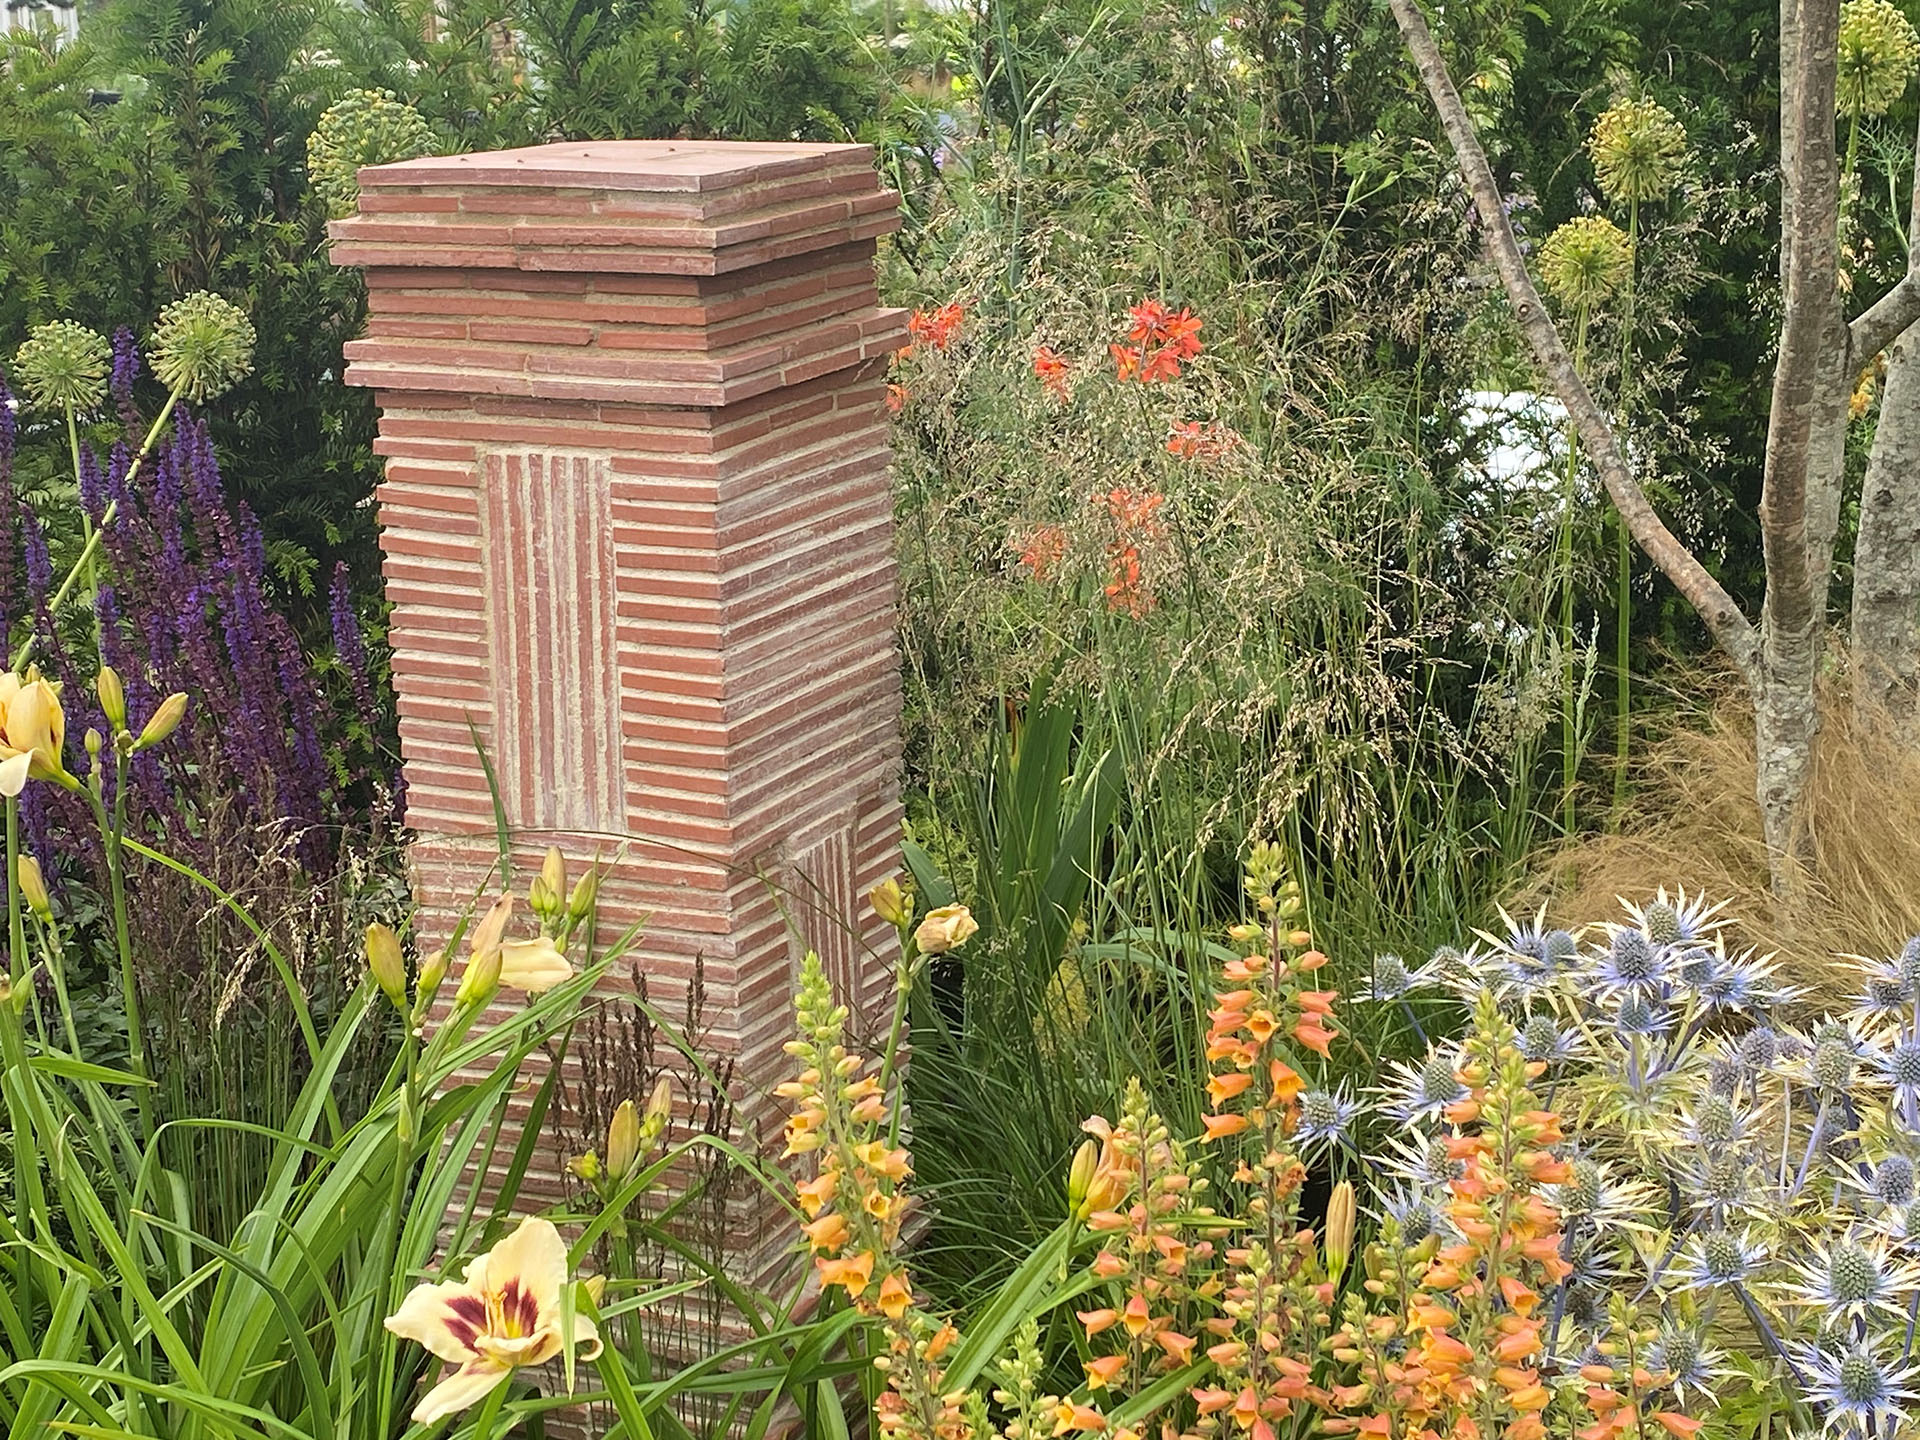 Grant Horticultural used Ketley Linium bricks to create columnal sculptures for their Arts Crafts Show Garden at RHS Tatton Park